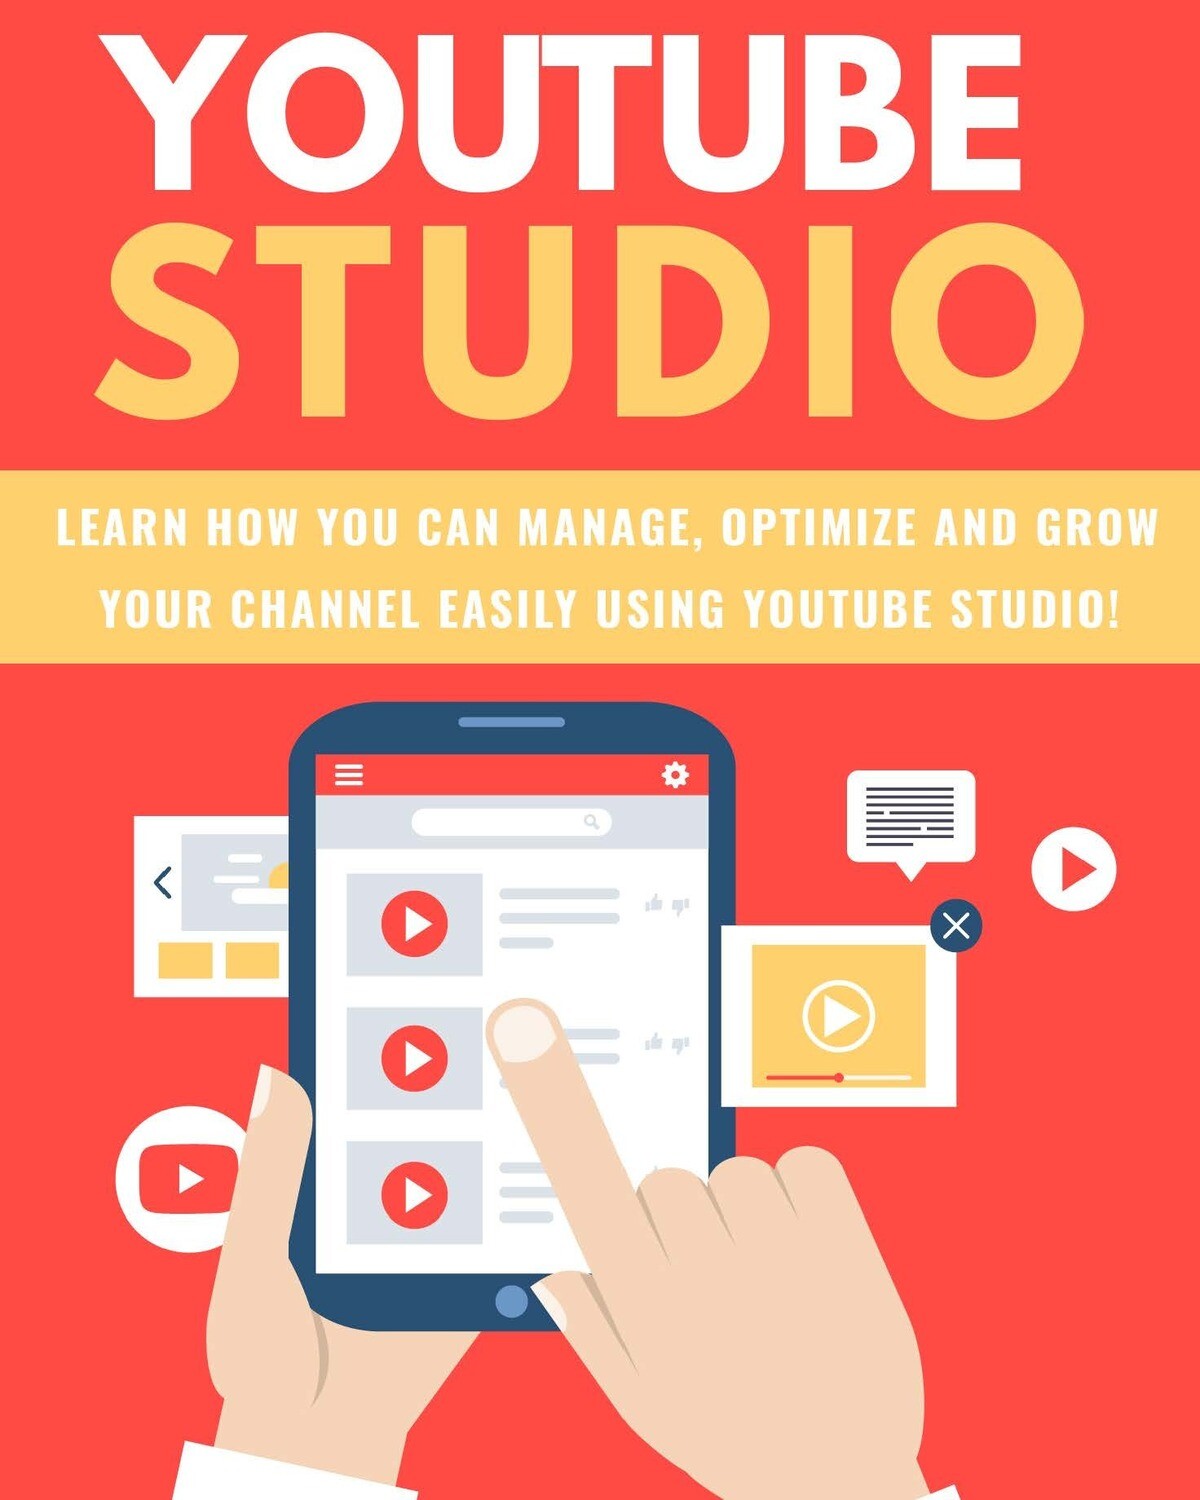 Youtube Studio - Learn How to Grow, Manage & Monetize